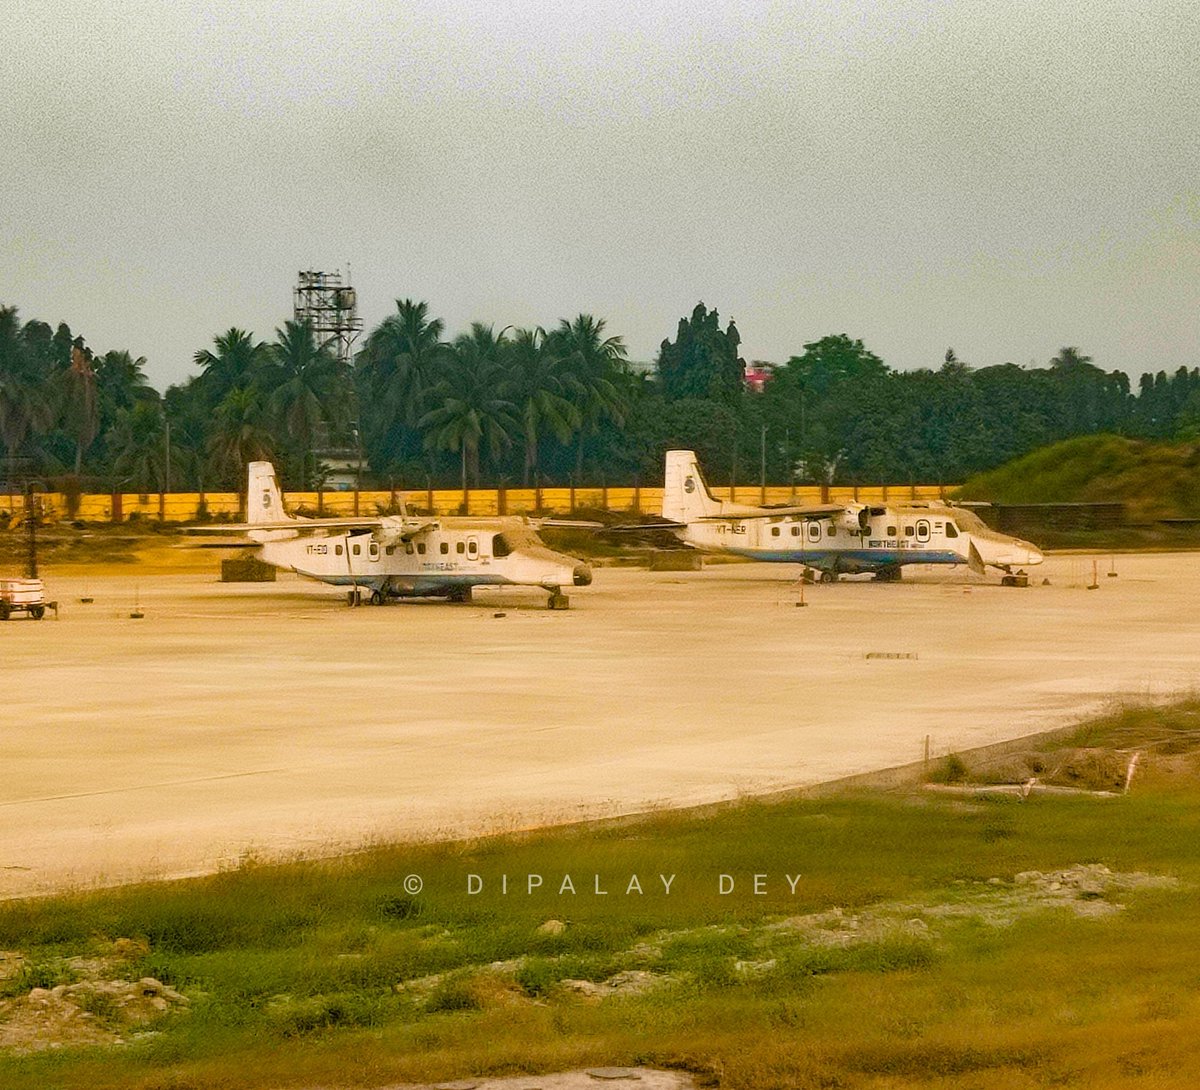 Two iconic birds from past now covered with dust & awaiting final faith !

Northeast Shuttles #Dornier Do228 VT-EIO & NER stored at #Kolkata

#DidYouKnow EIO was with #Vayudoot & #IndianAirlines ,delivered in 1984

Northeast Shuttles in its short life had served #NorthEast India